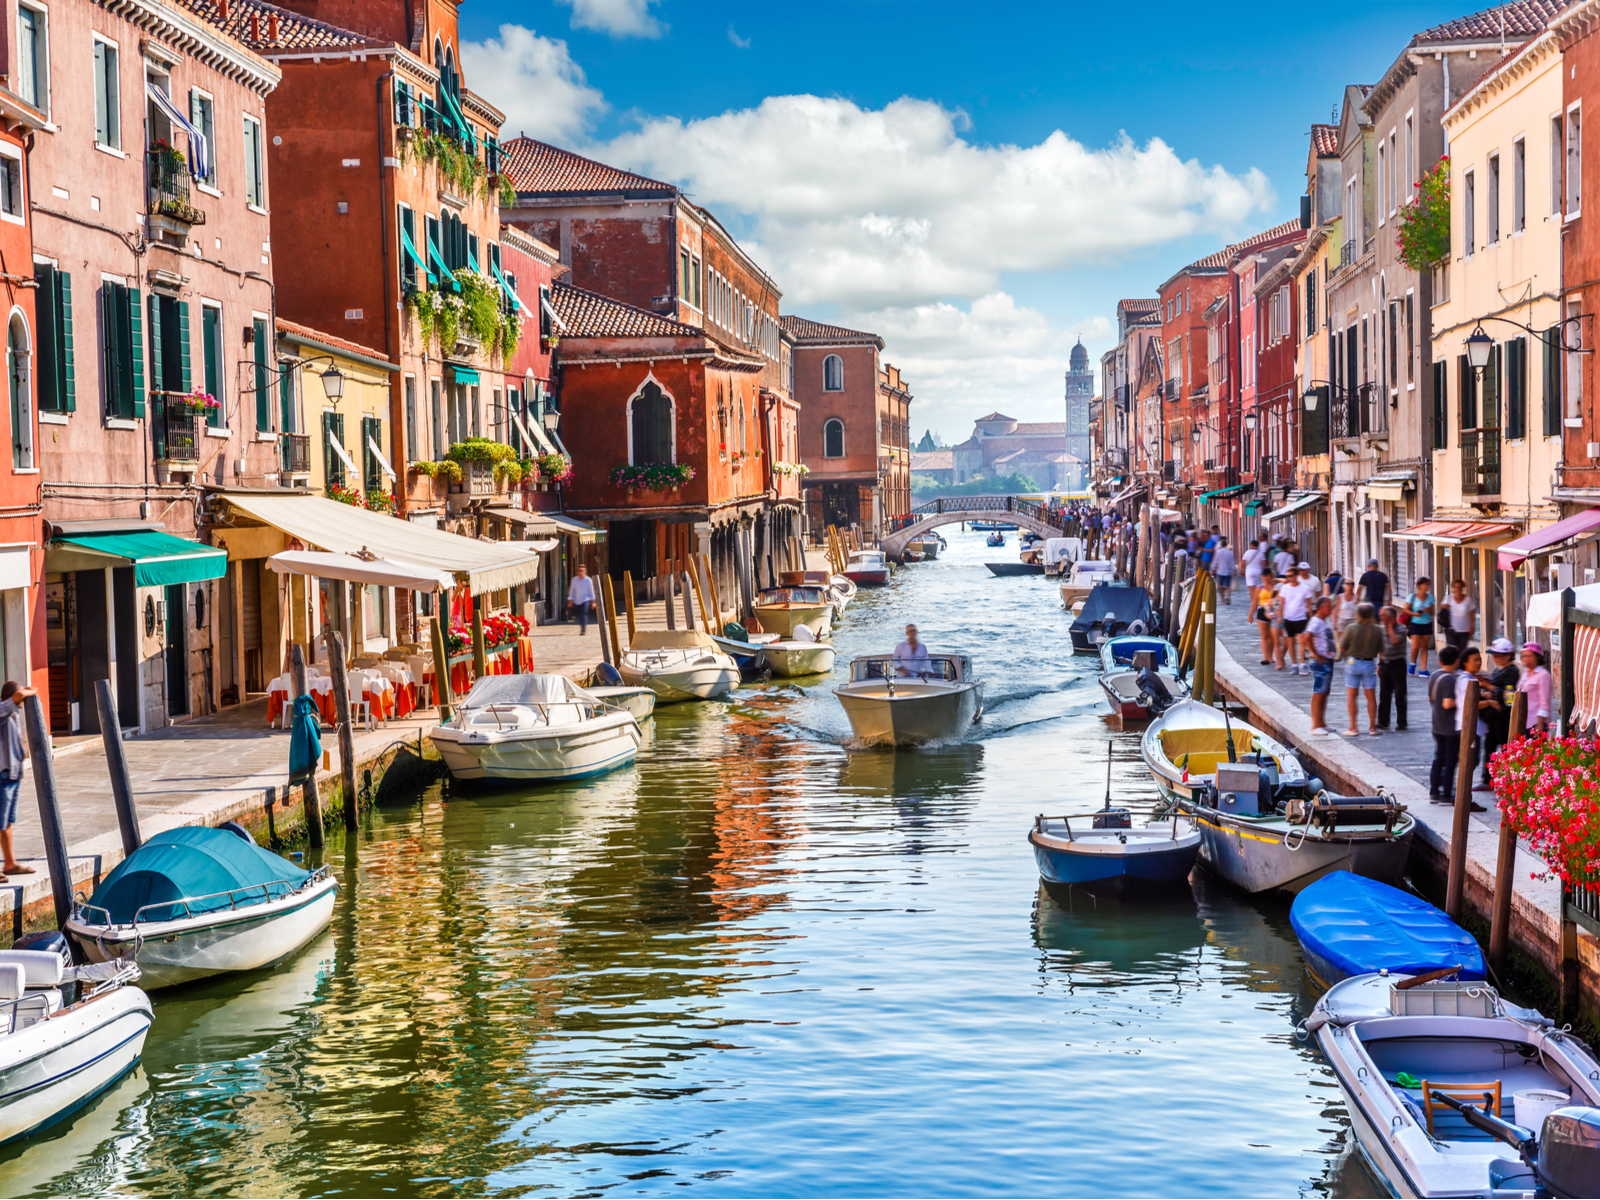 Canals in Venice, one of the best places to visit in Italy, as seen in the Summer